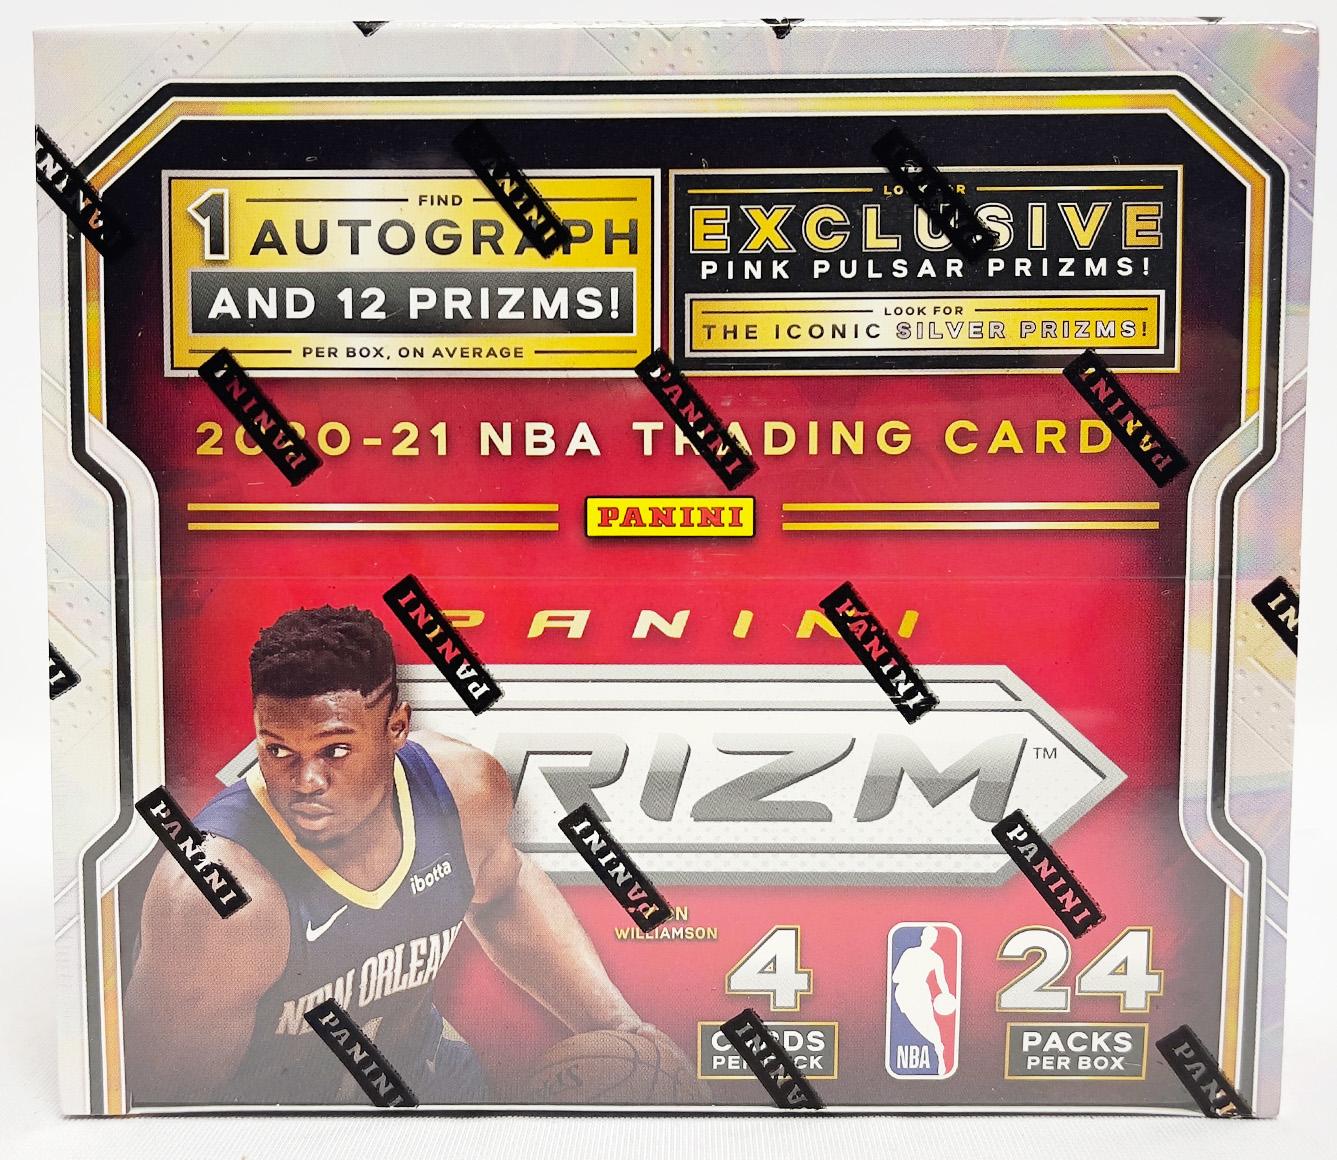 2017-18 Panini Prizm Basketball Retail Box 24 Packs of 4 Cards: 1 Autograph and 12 Prisms on average. 